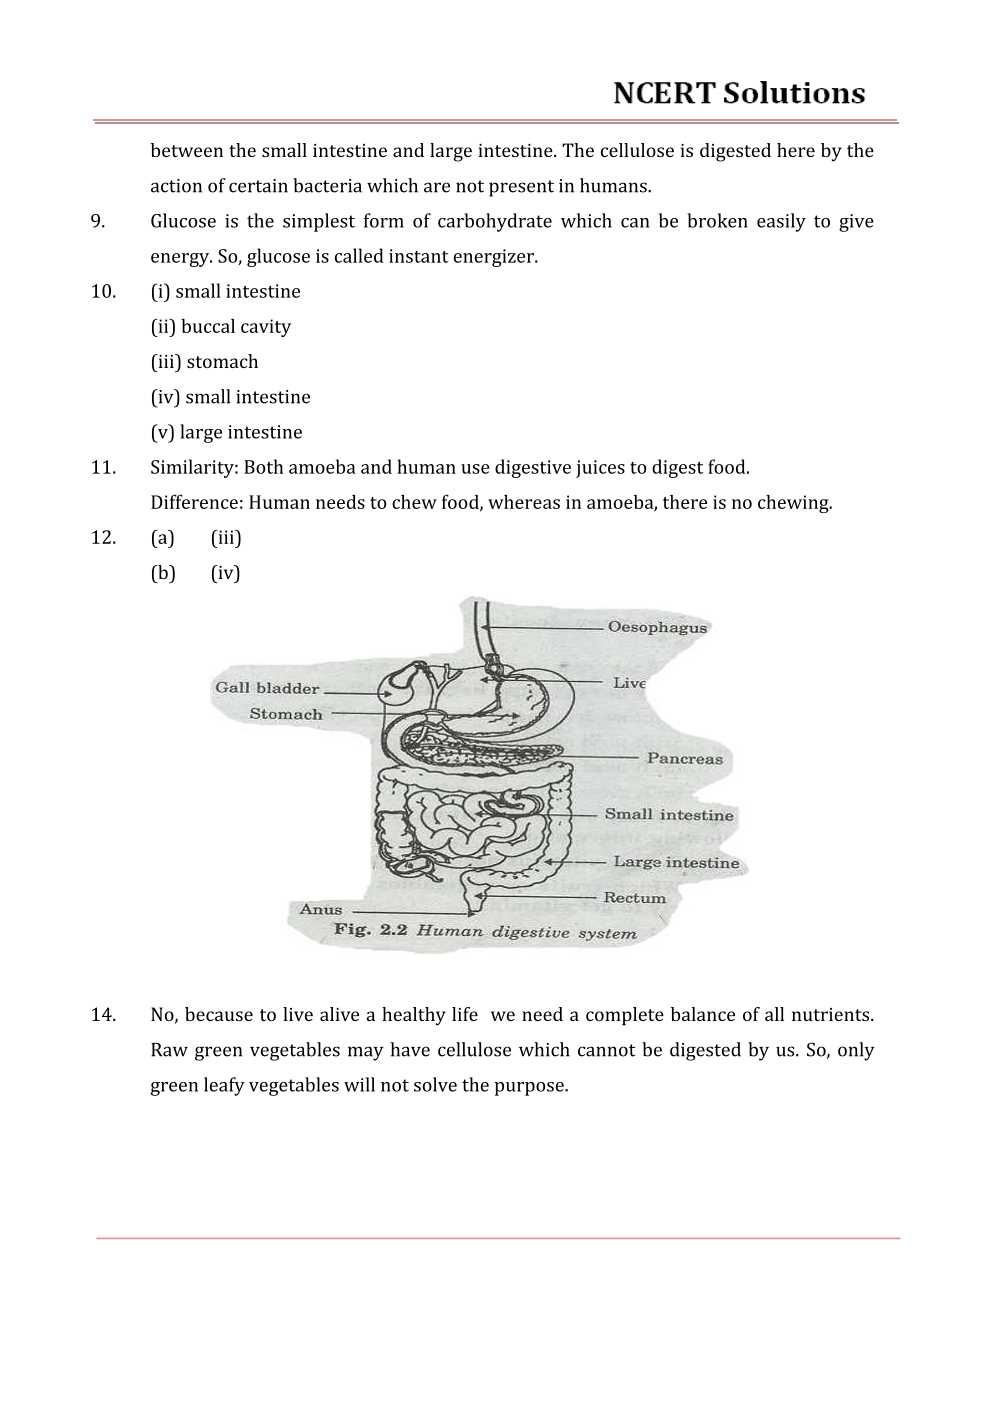 NCERT Solutions For Class 7 science Chapter 2 Nutrition in Animals